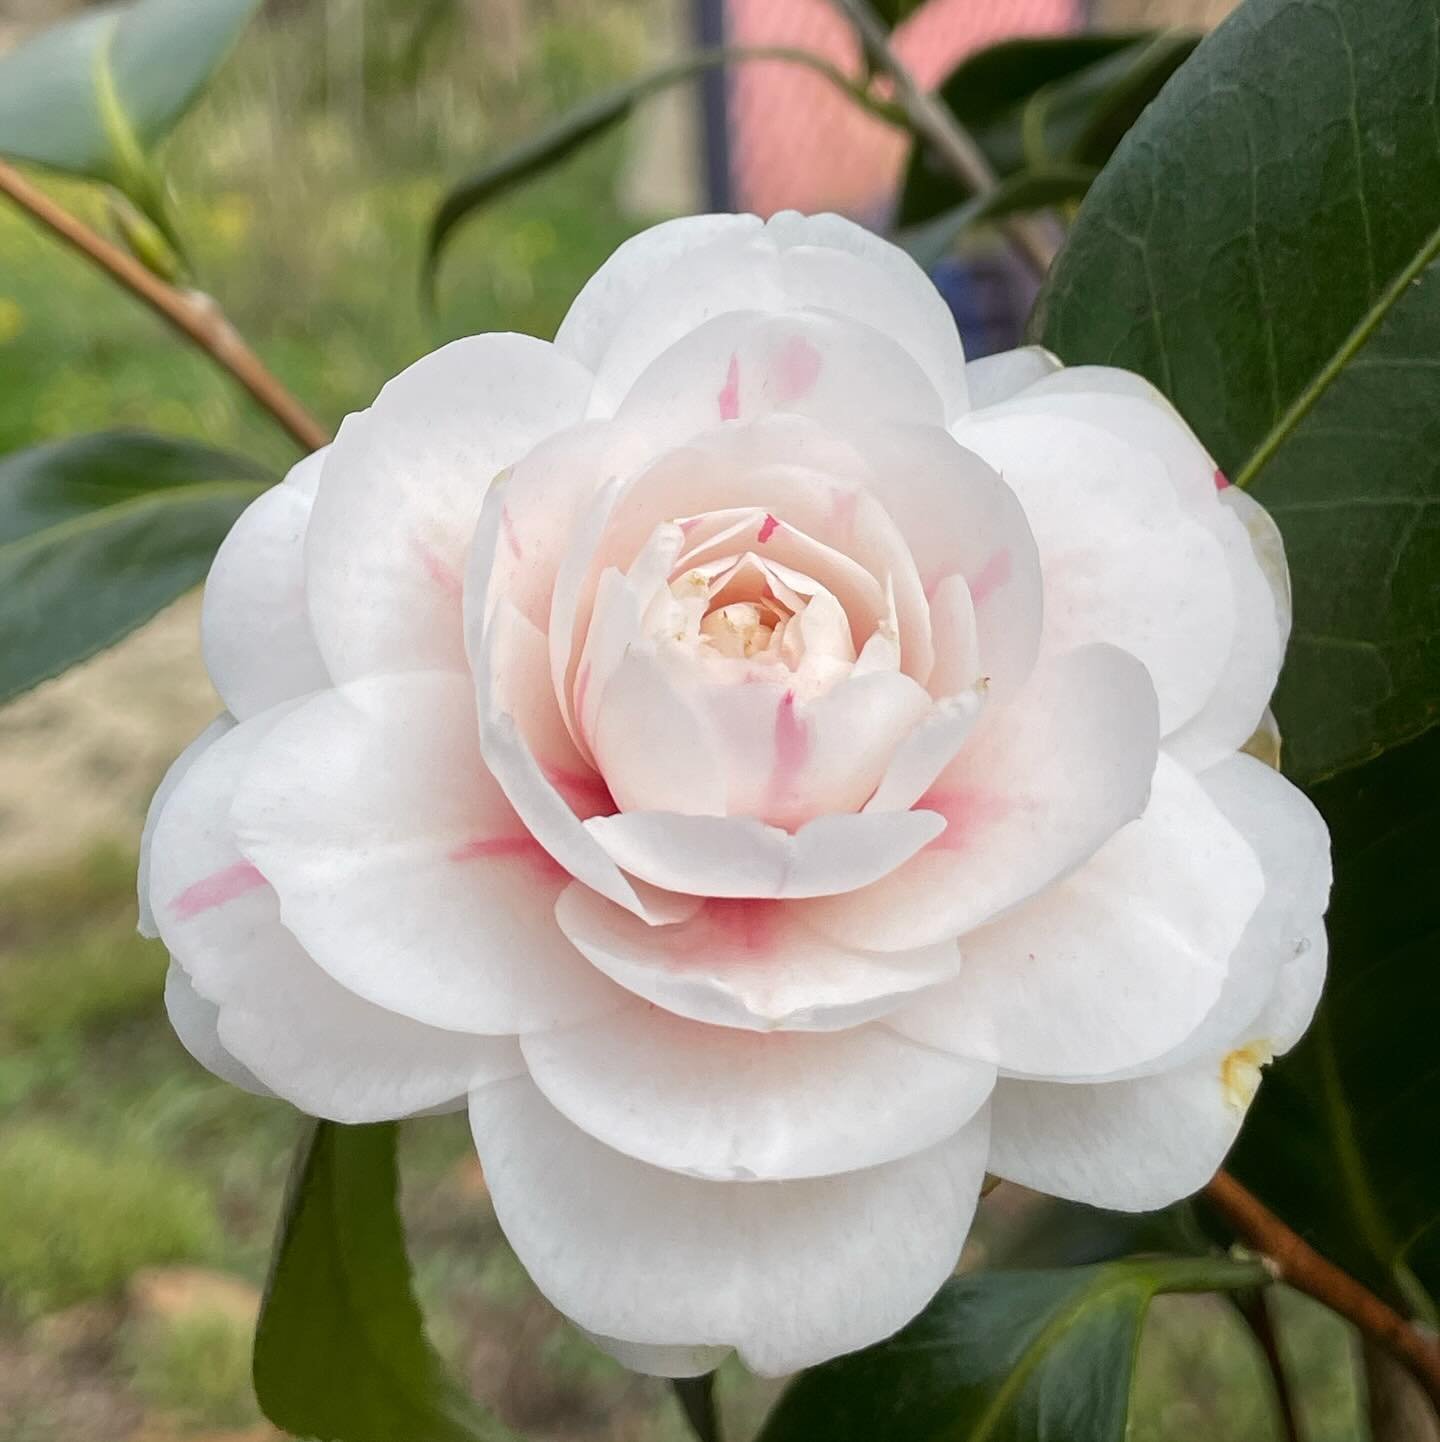 Come and visit the garden today! This glorious Camellia and her friends are waiting for you.